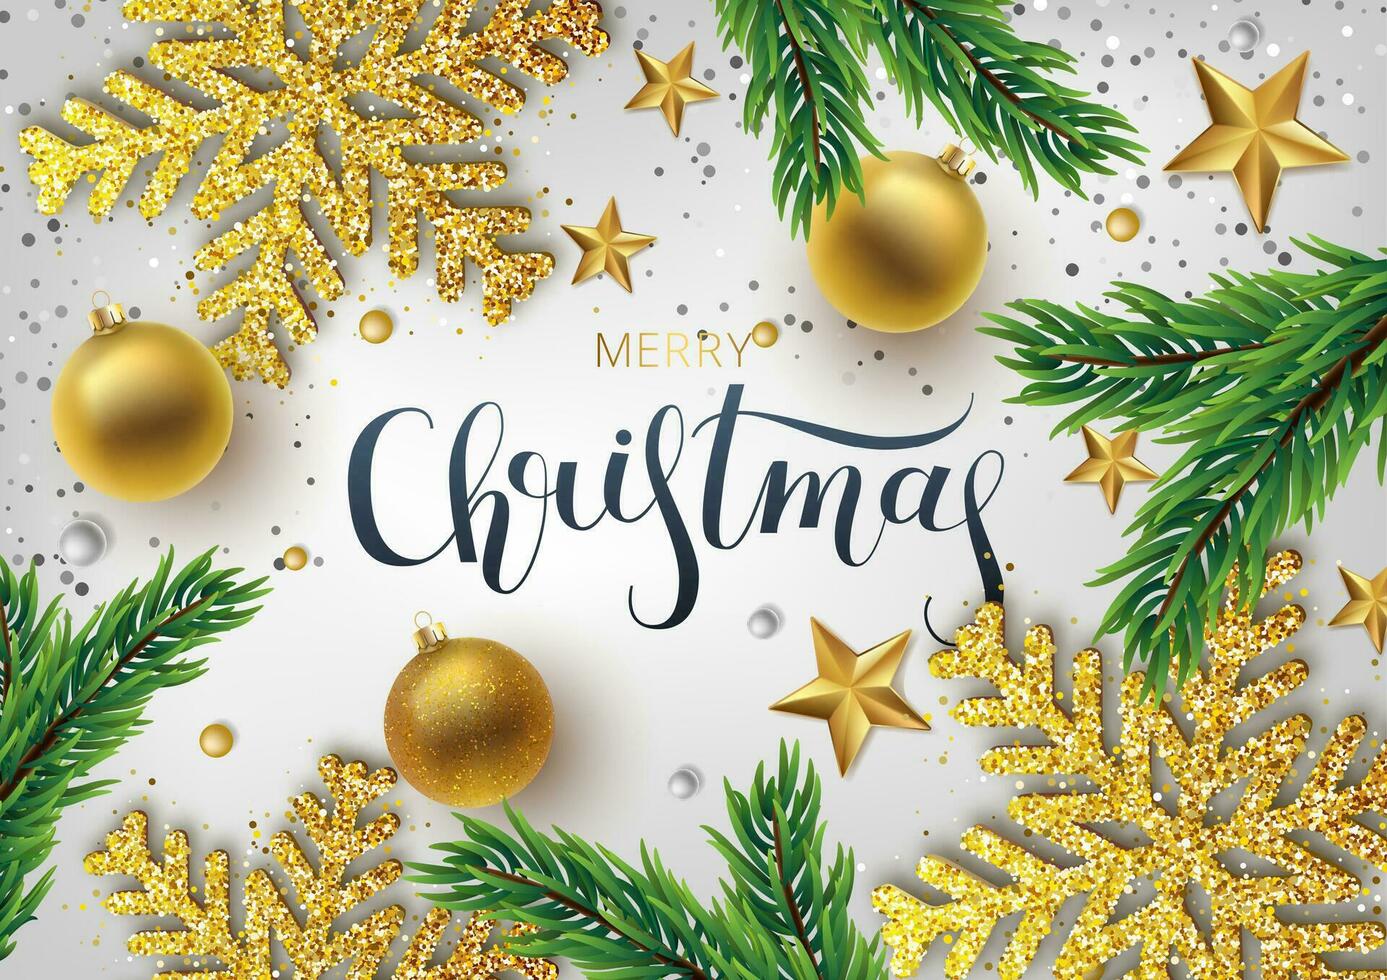 Christmas greeting card, vector background.Gold Christmas ball, and branch fir-tree. Metallic gold and silver Christmas snowflake. Hand drawn lettering. Vector illustration